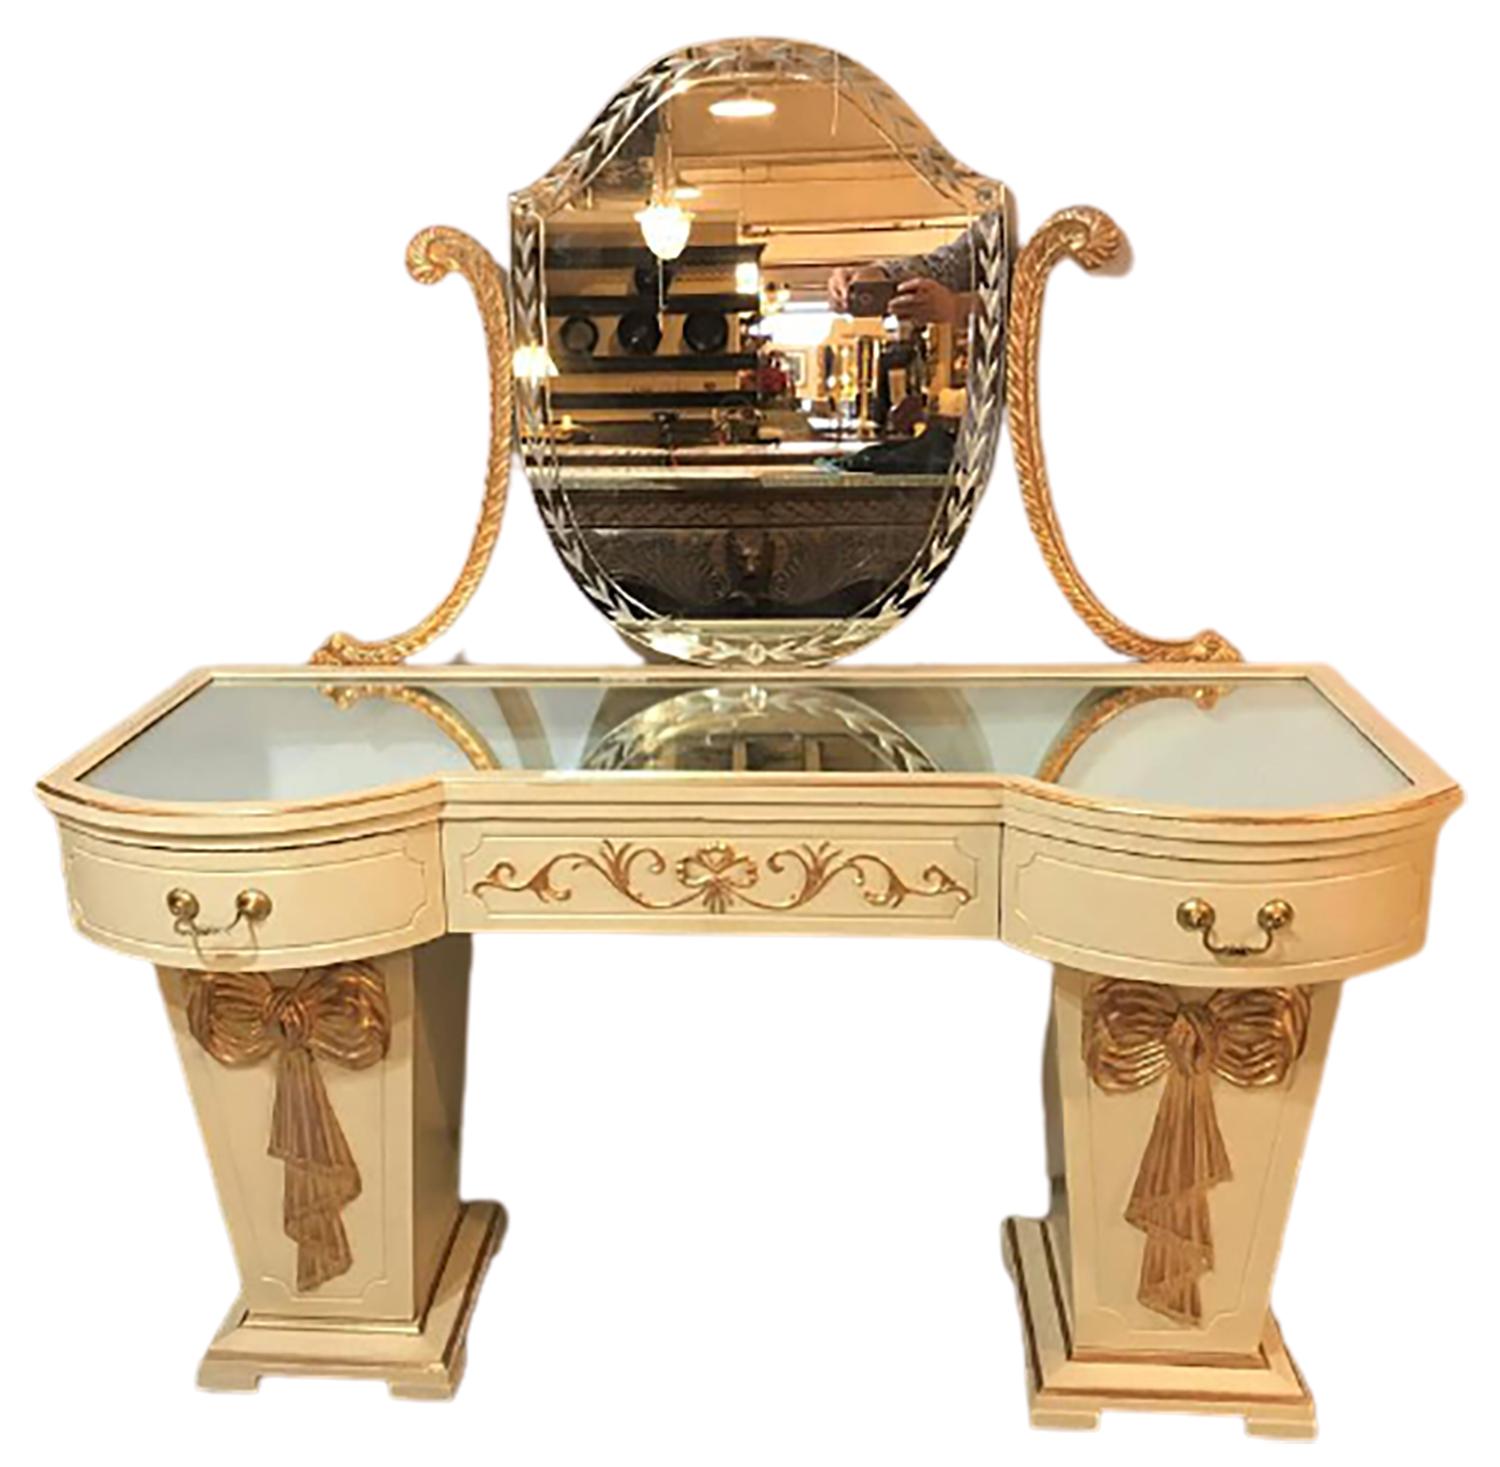 Grosfeld House parcel paint and gilt decorated vanity or desk with mirror. A fine one of a kind ribbon and tastle solid wood carved writing desk or ladies vanity. The tiered square base sitting on feet leading to a column-form pair of doors with